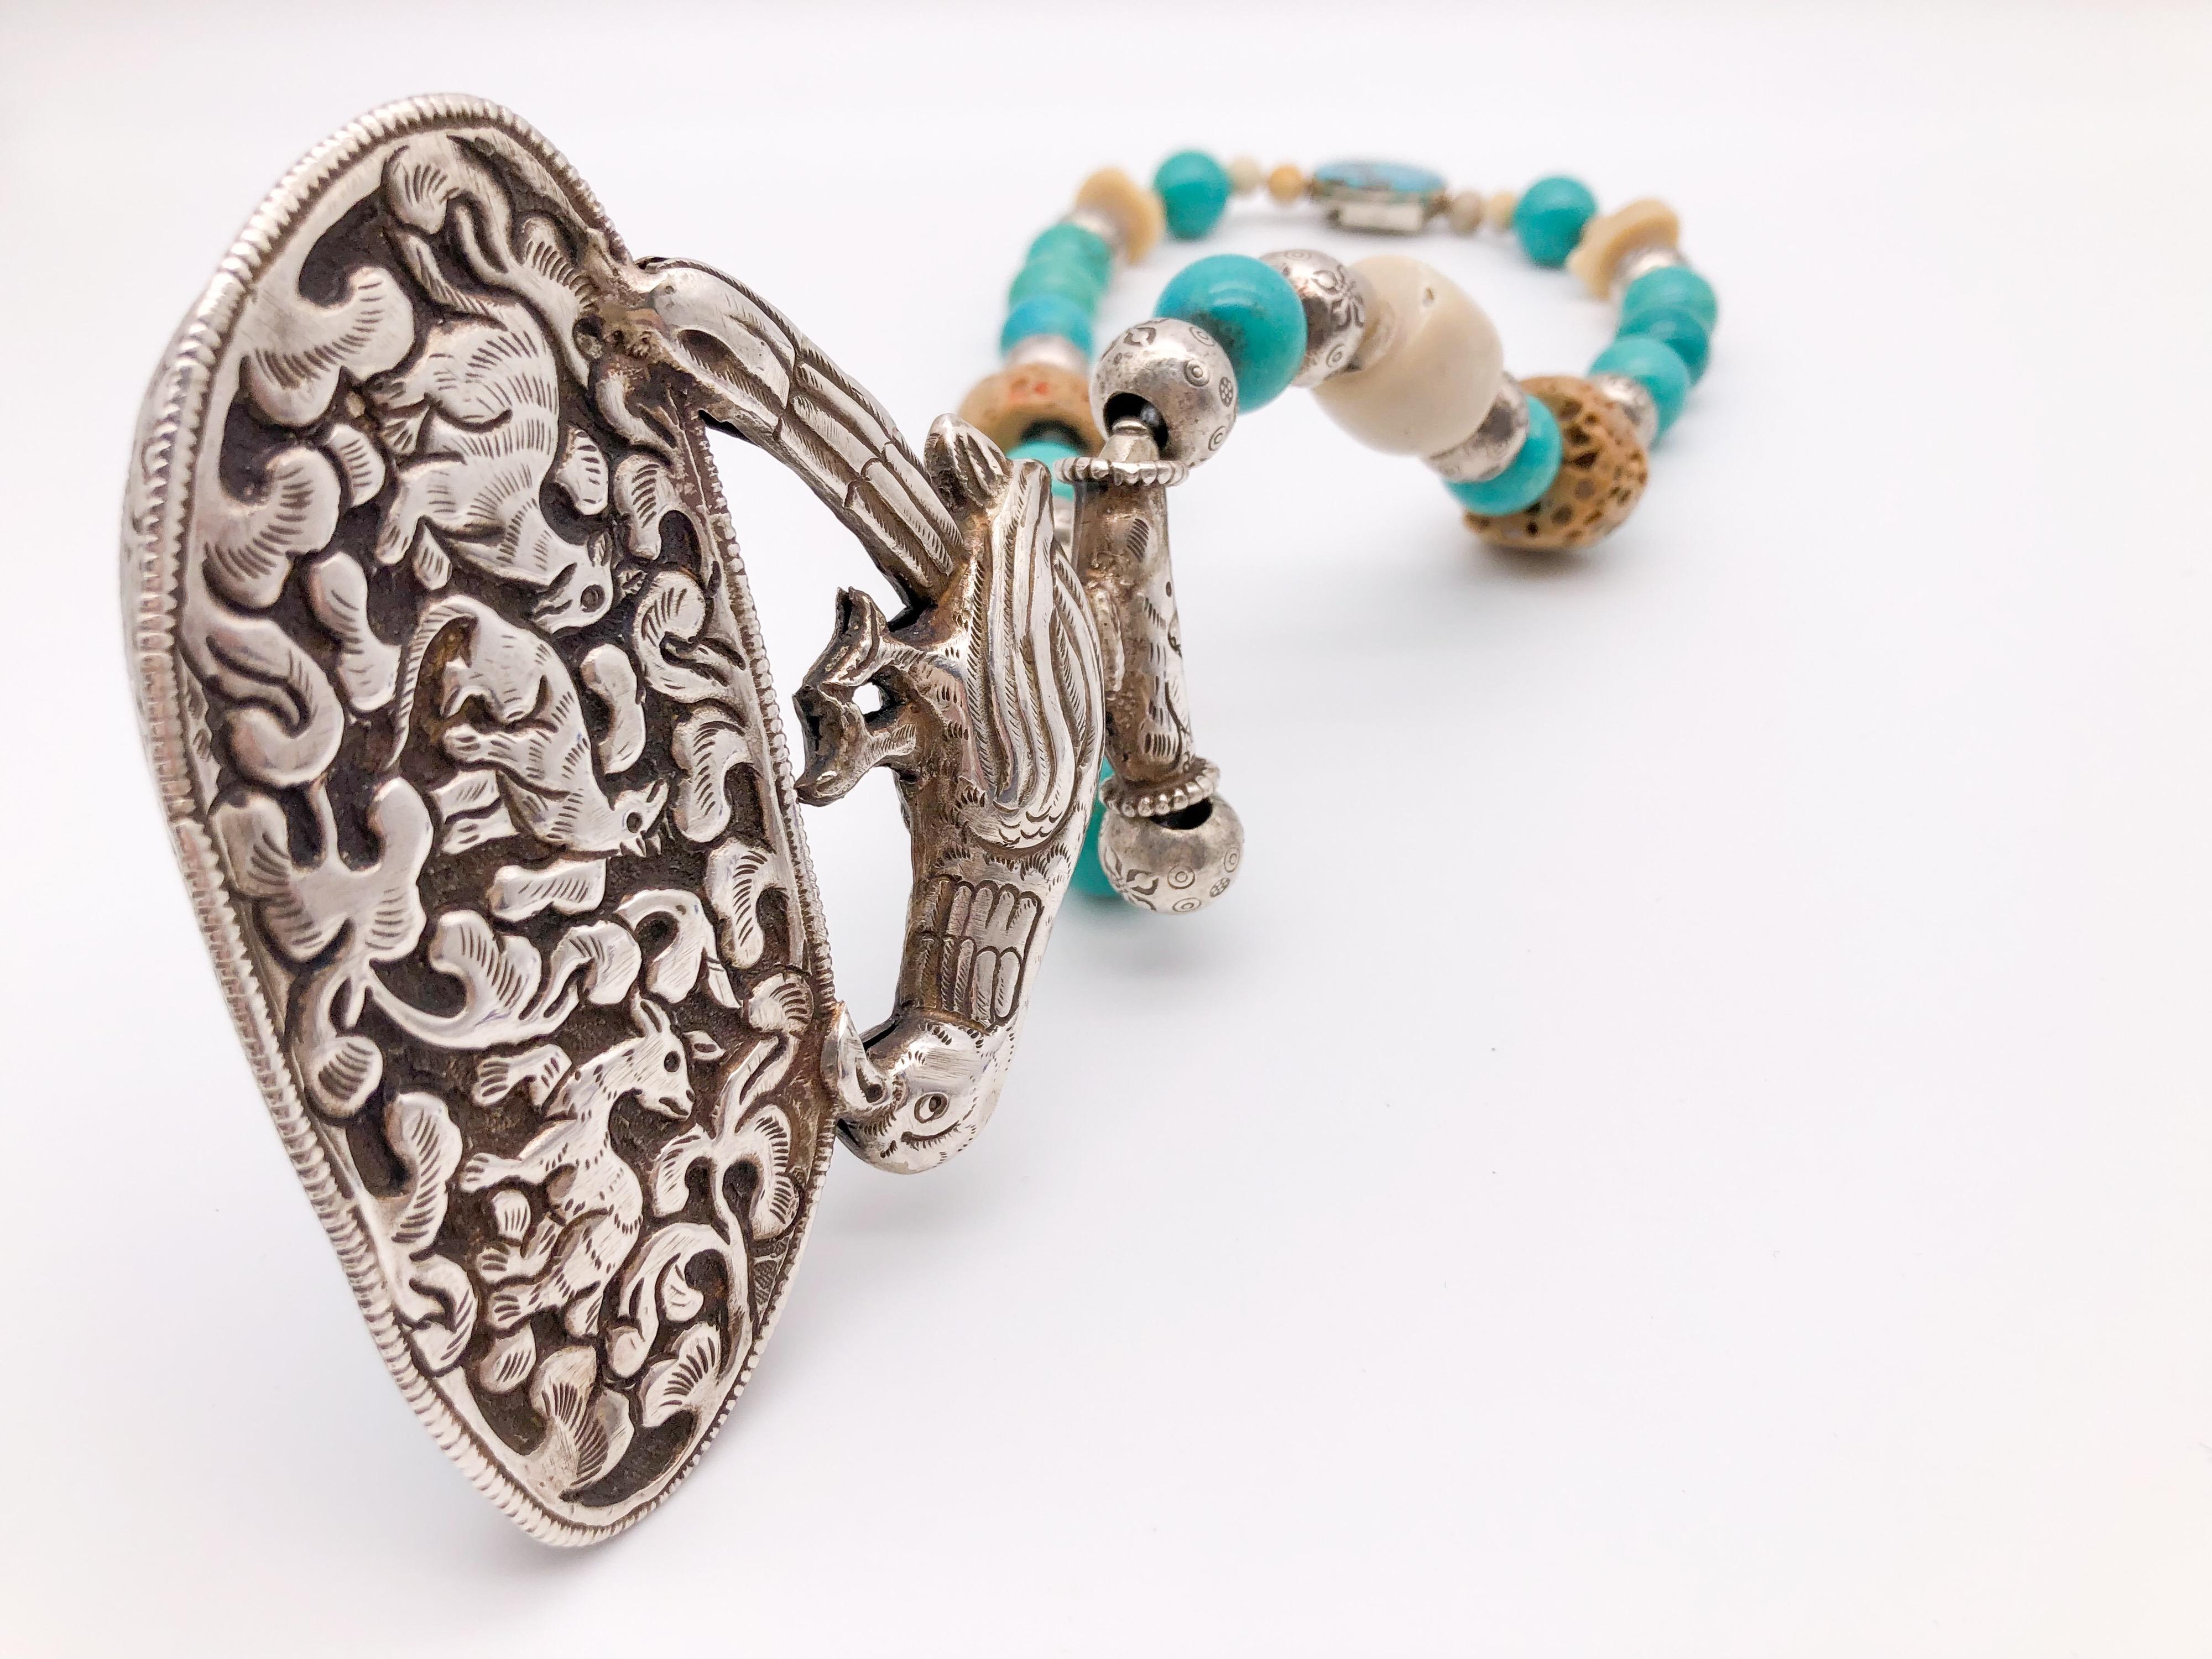 Mixed Cut A.Jeschel Turquoise and Ethnic beads necklace with Tibetan Silver Bird Pendant   For Sale